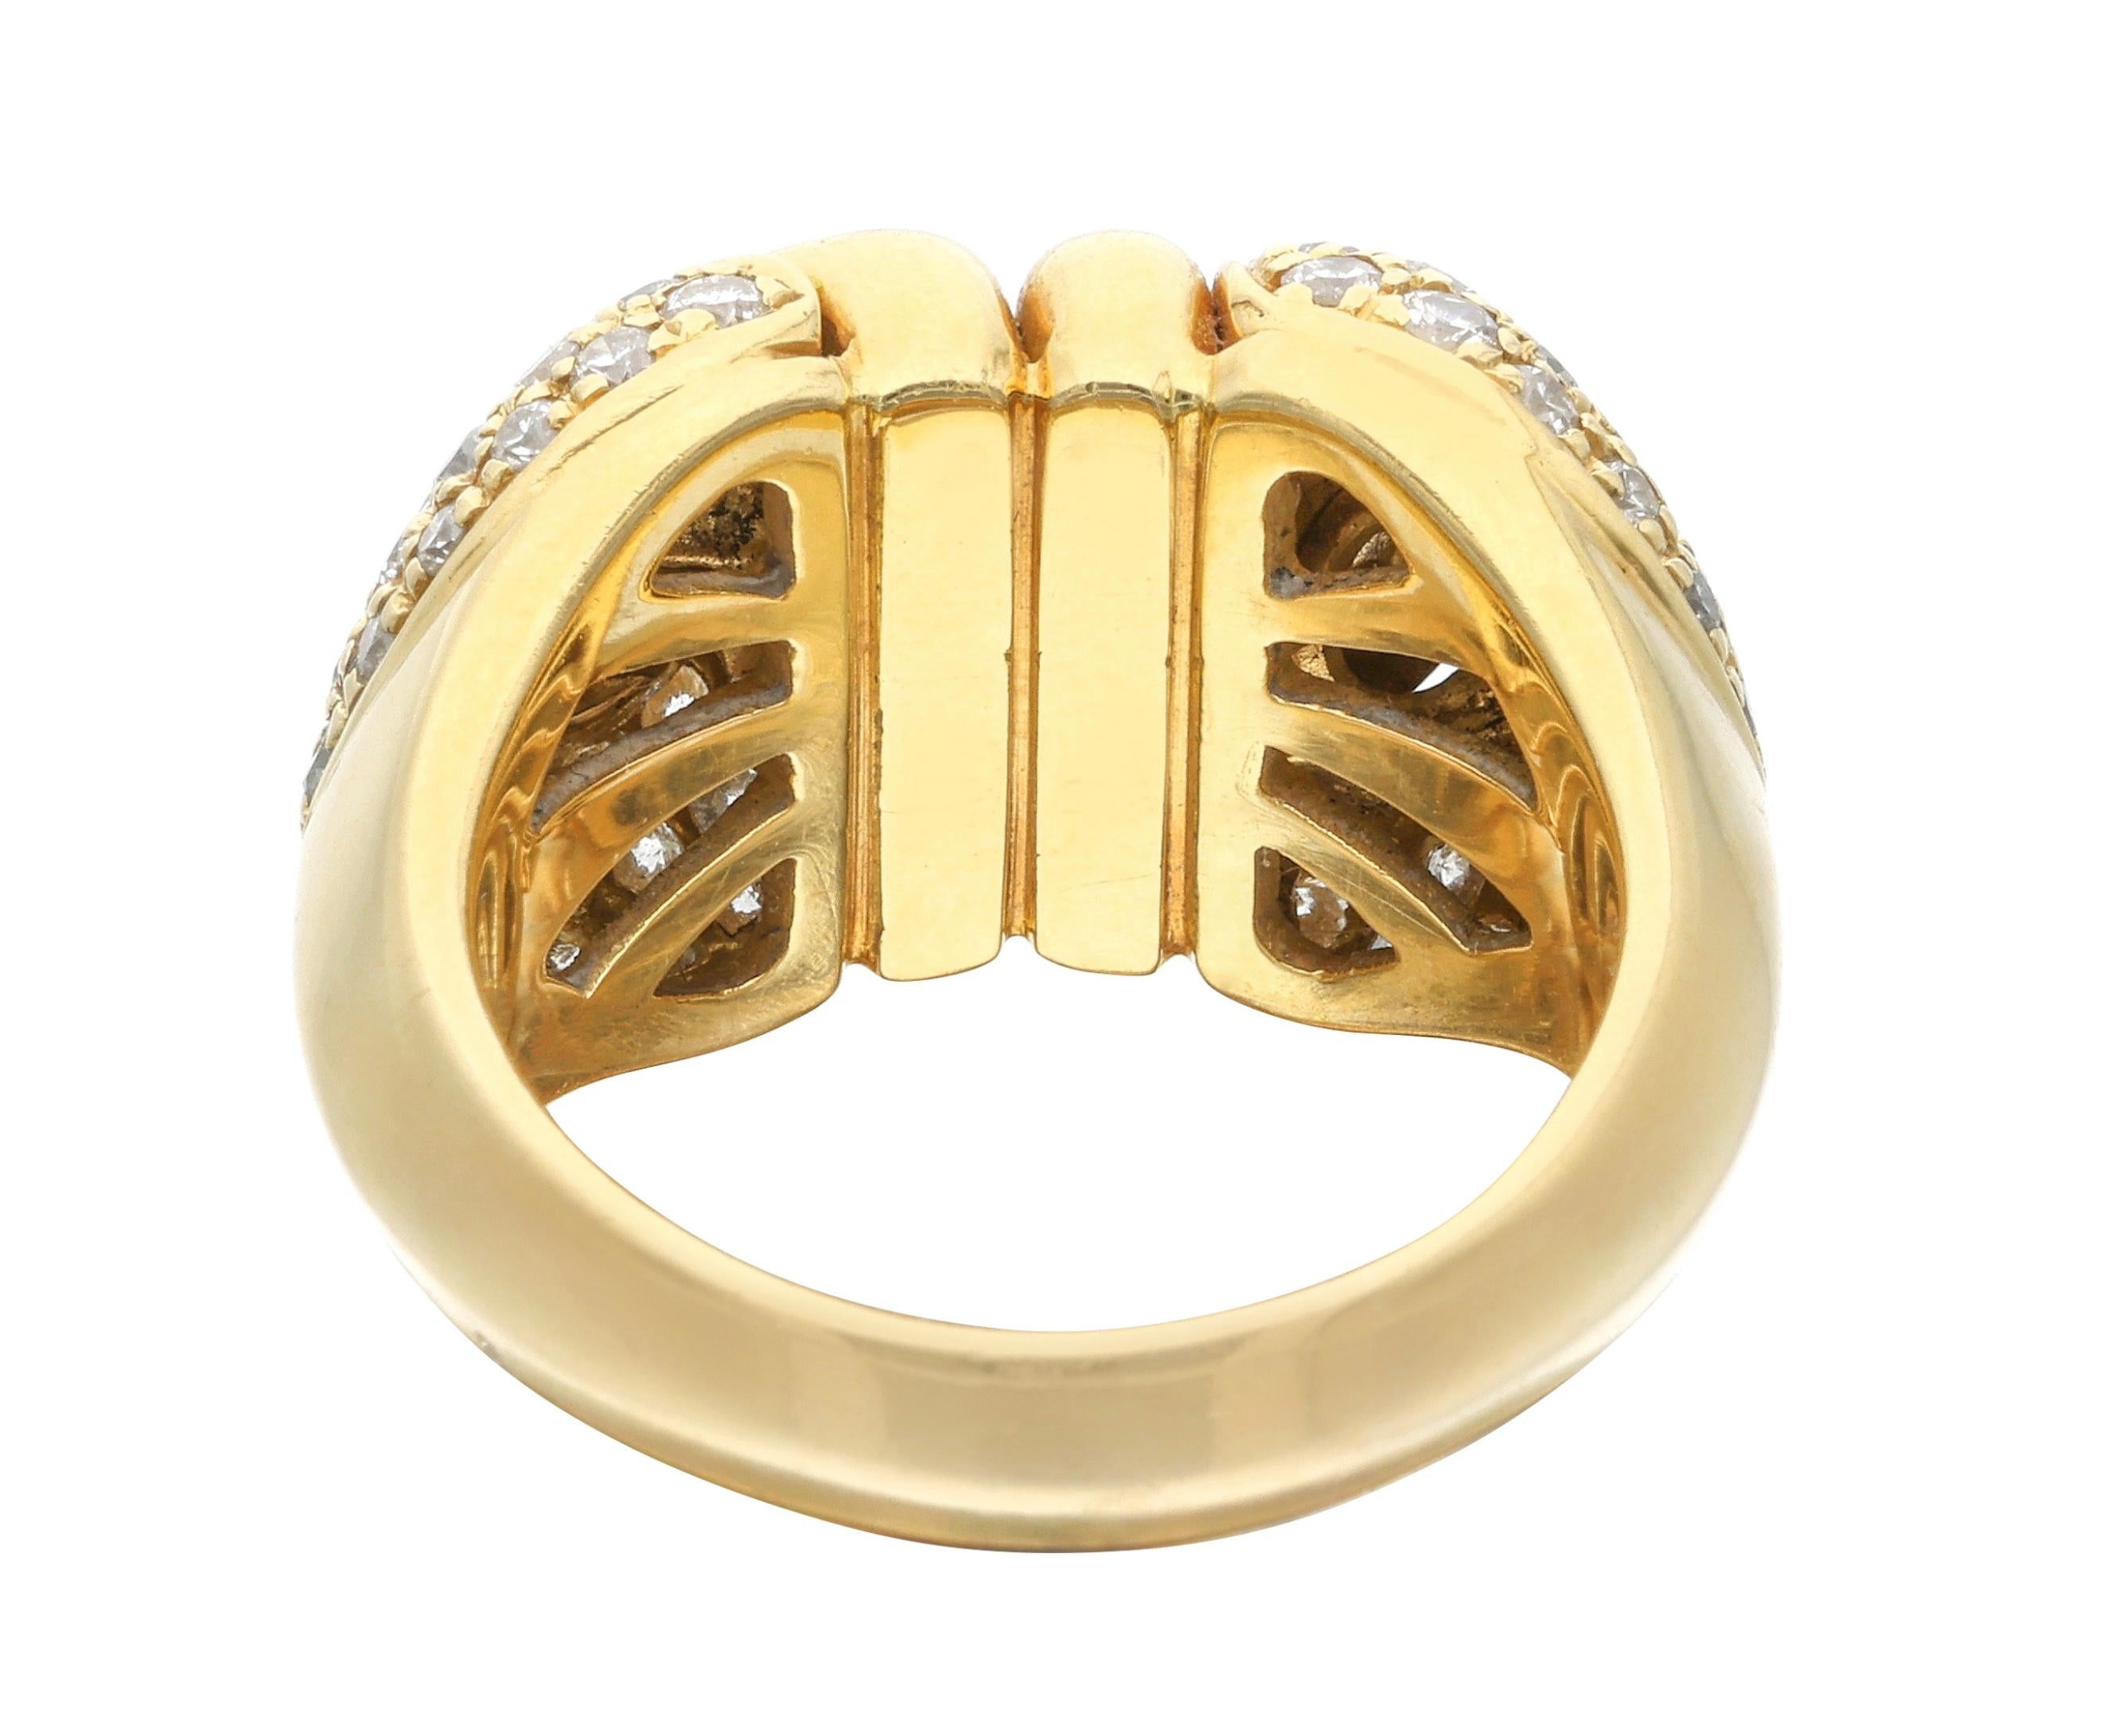 Bvlgari Gold and Diamond Ring In Excellent Condition For Sale In New York, NY